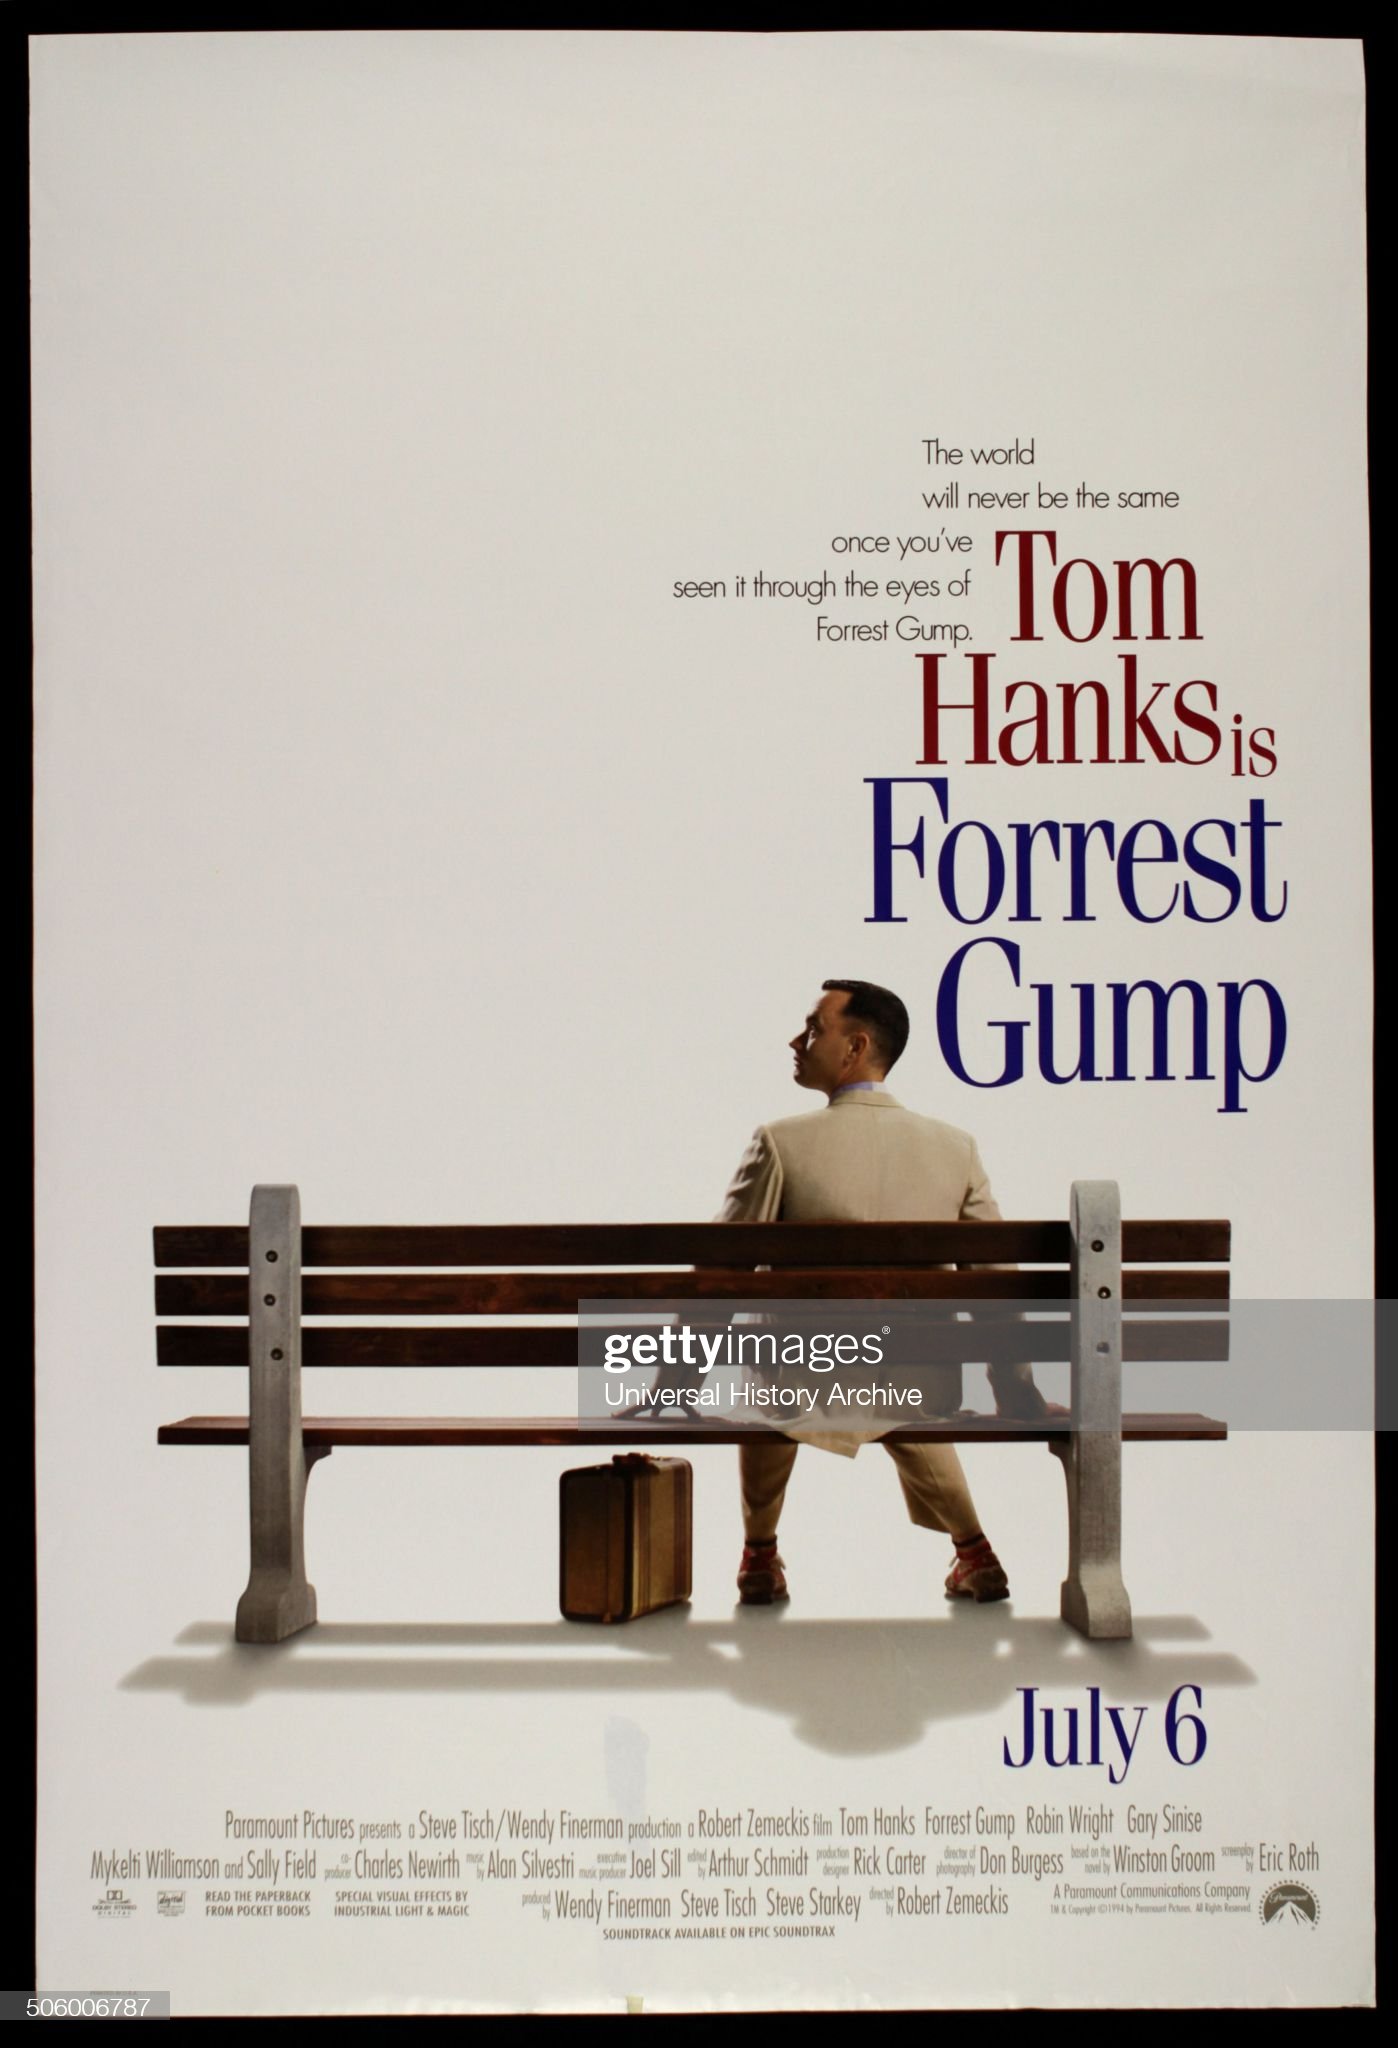 Forrest Gump a 1994 American epic romantic comedy film starring Tom. News Photo